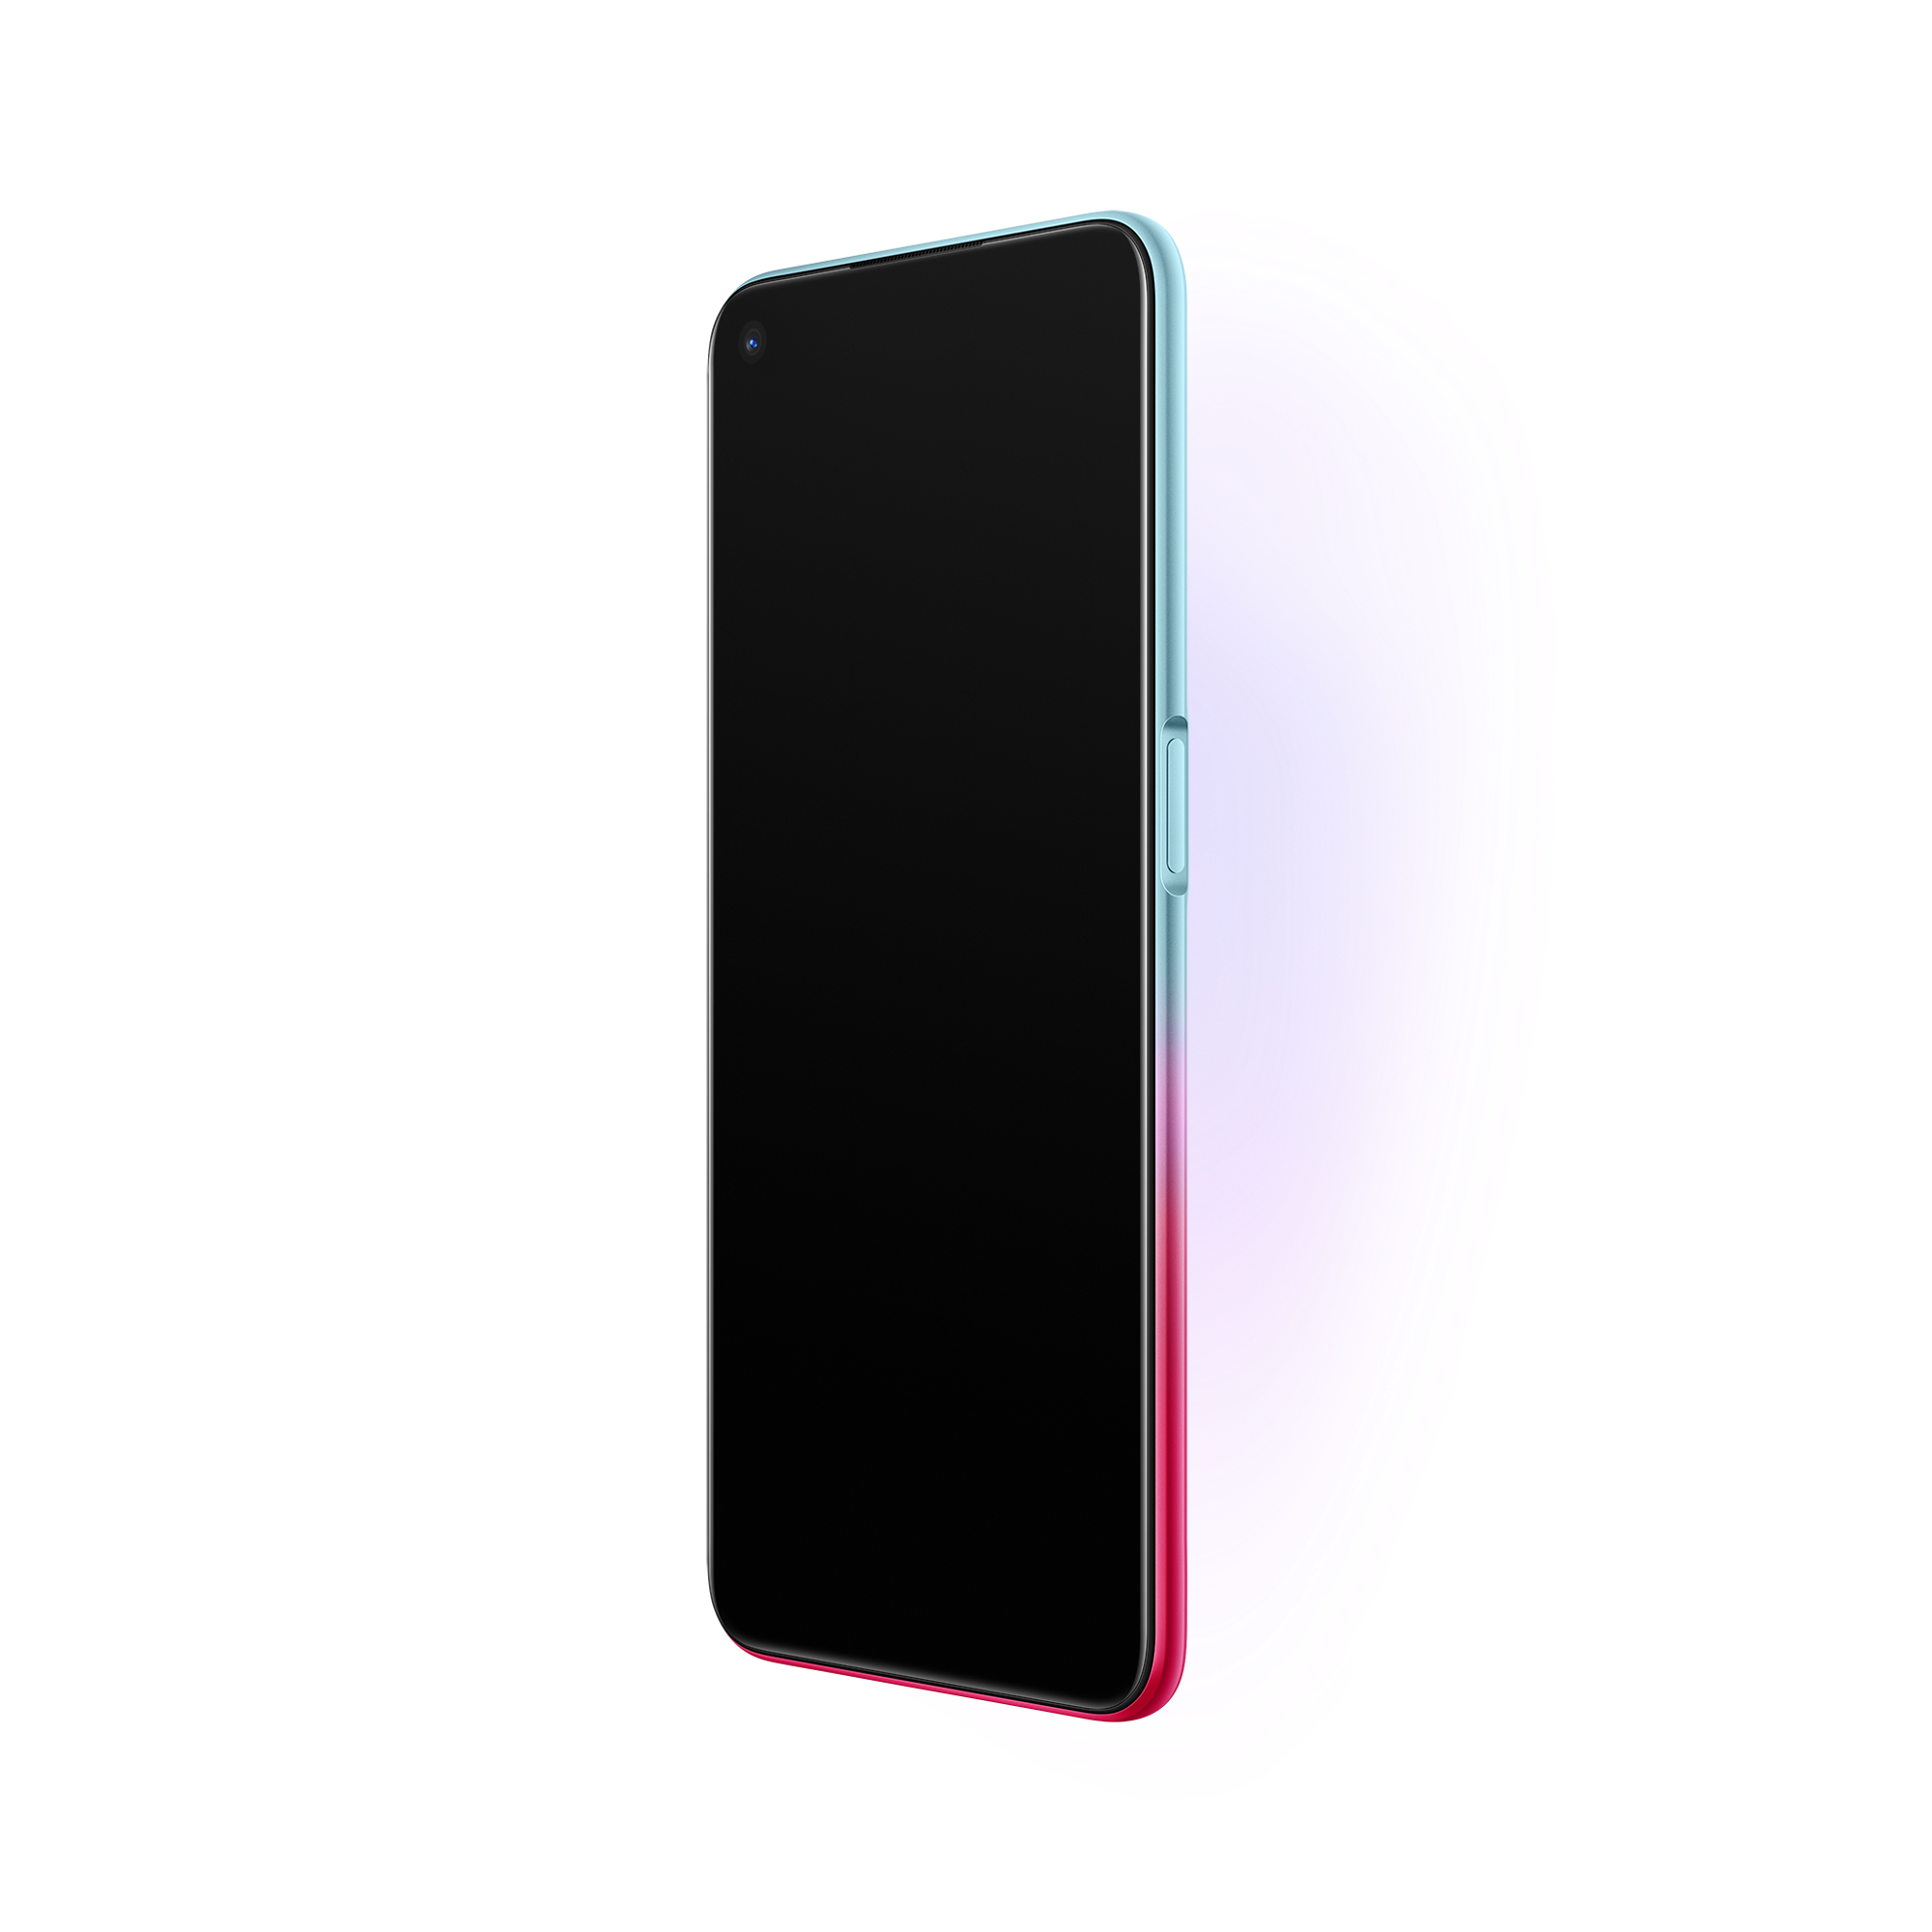 OPPO A73 5G Appearance